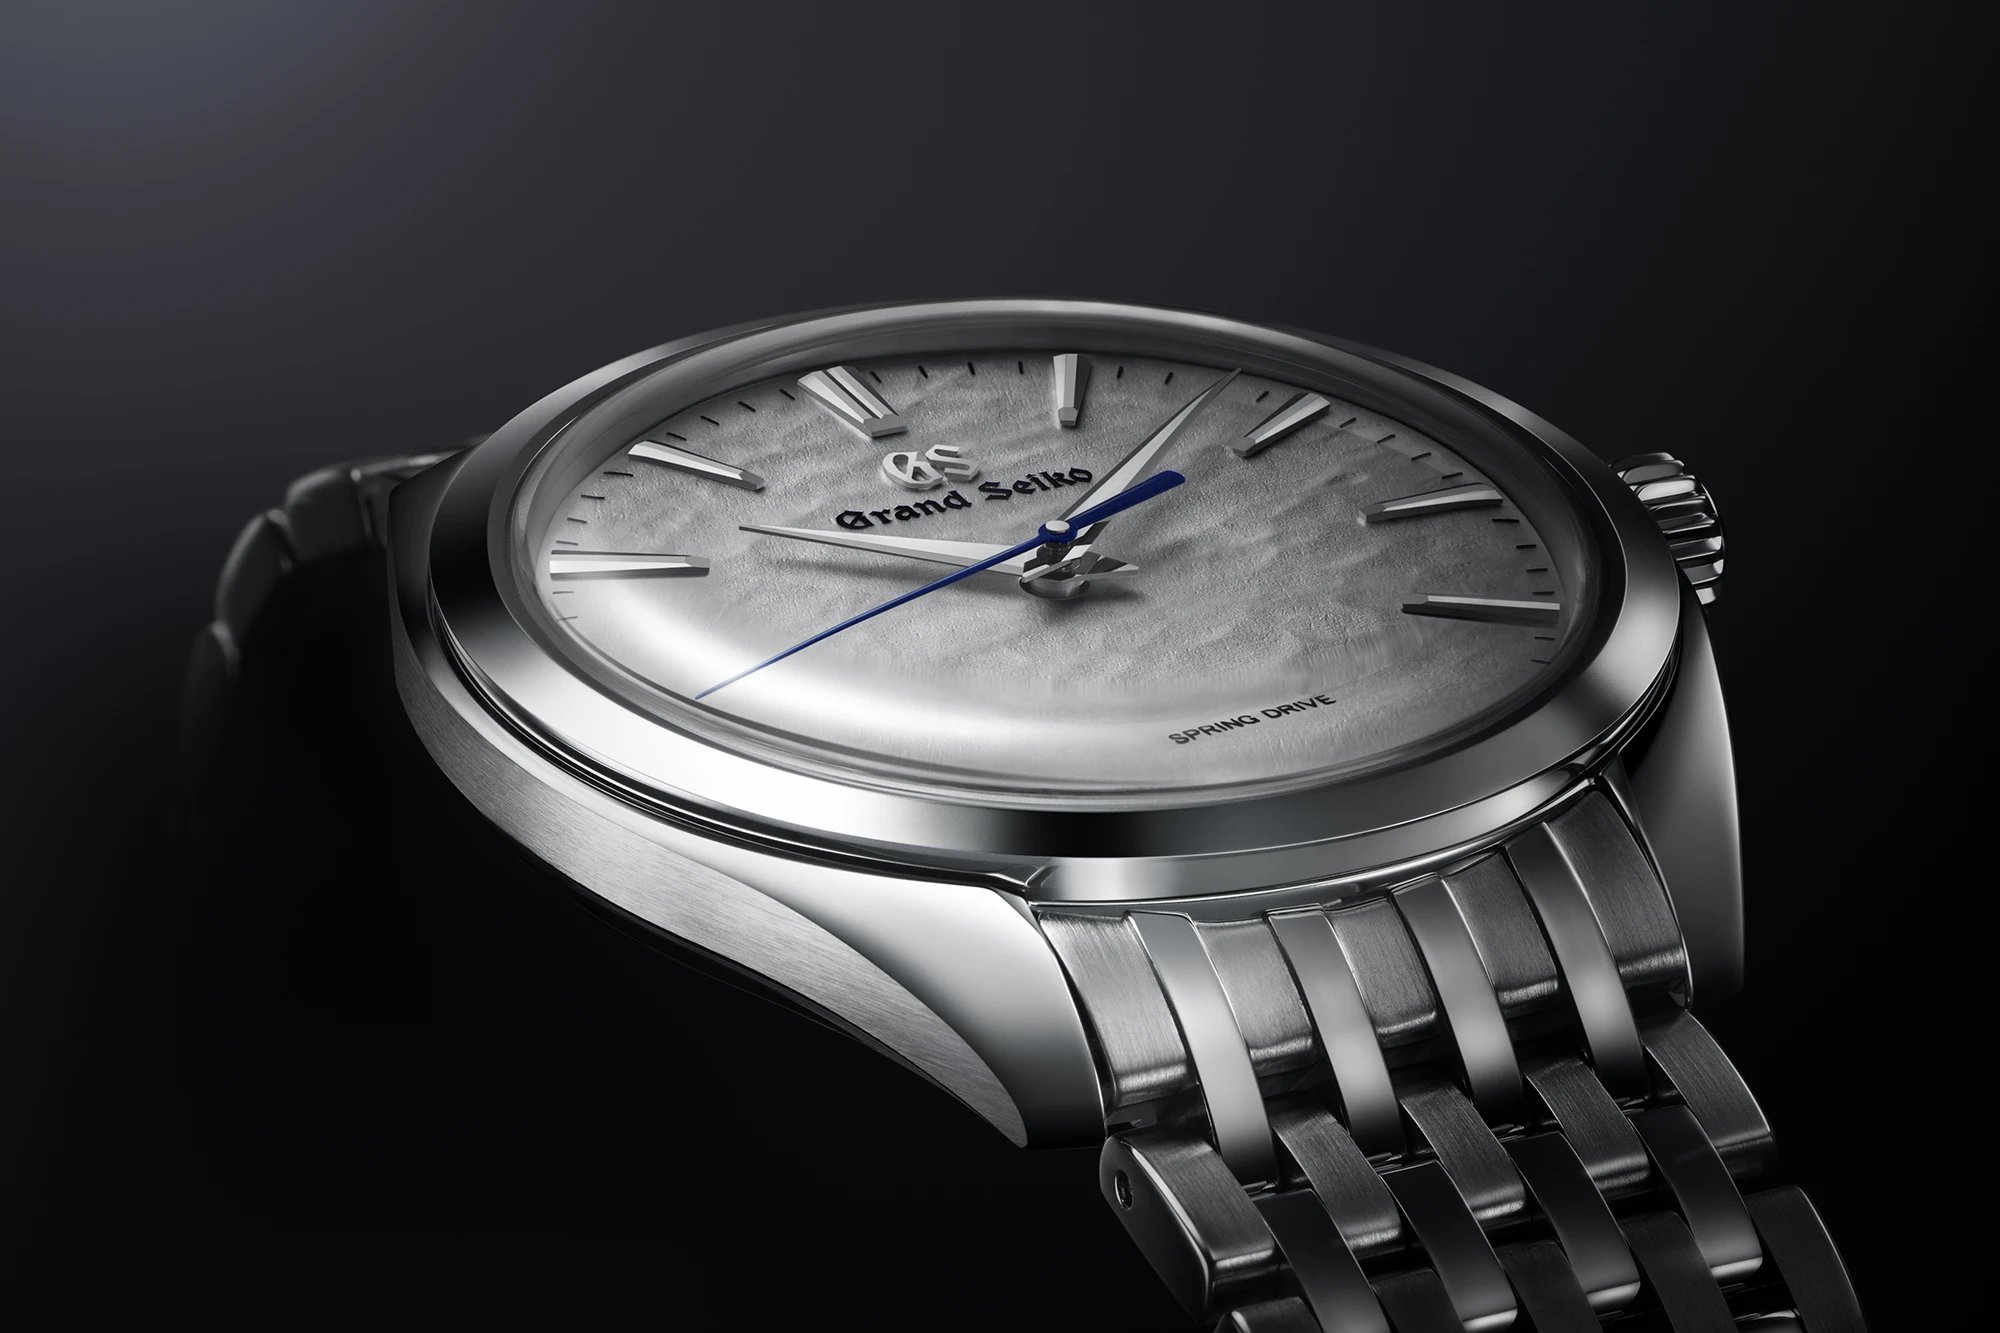 Grand Seiko SBGY013 white dial watch with domed sapphire.